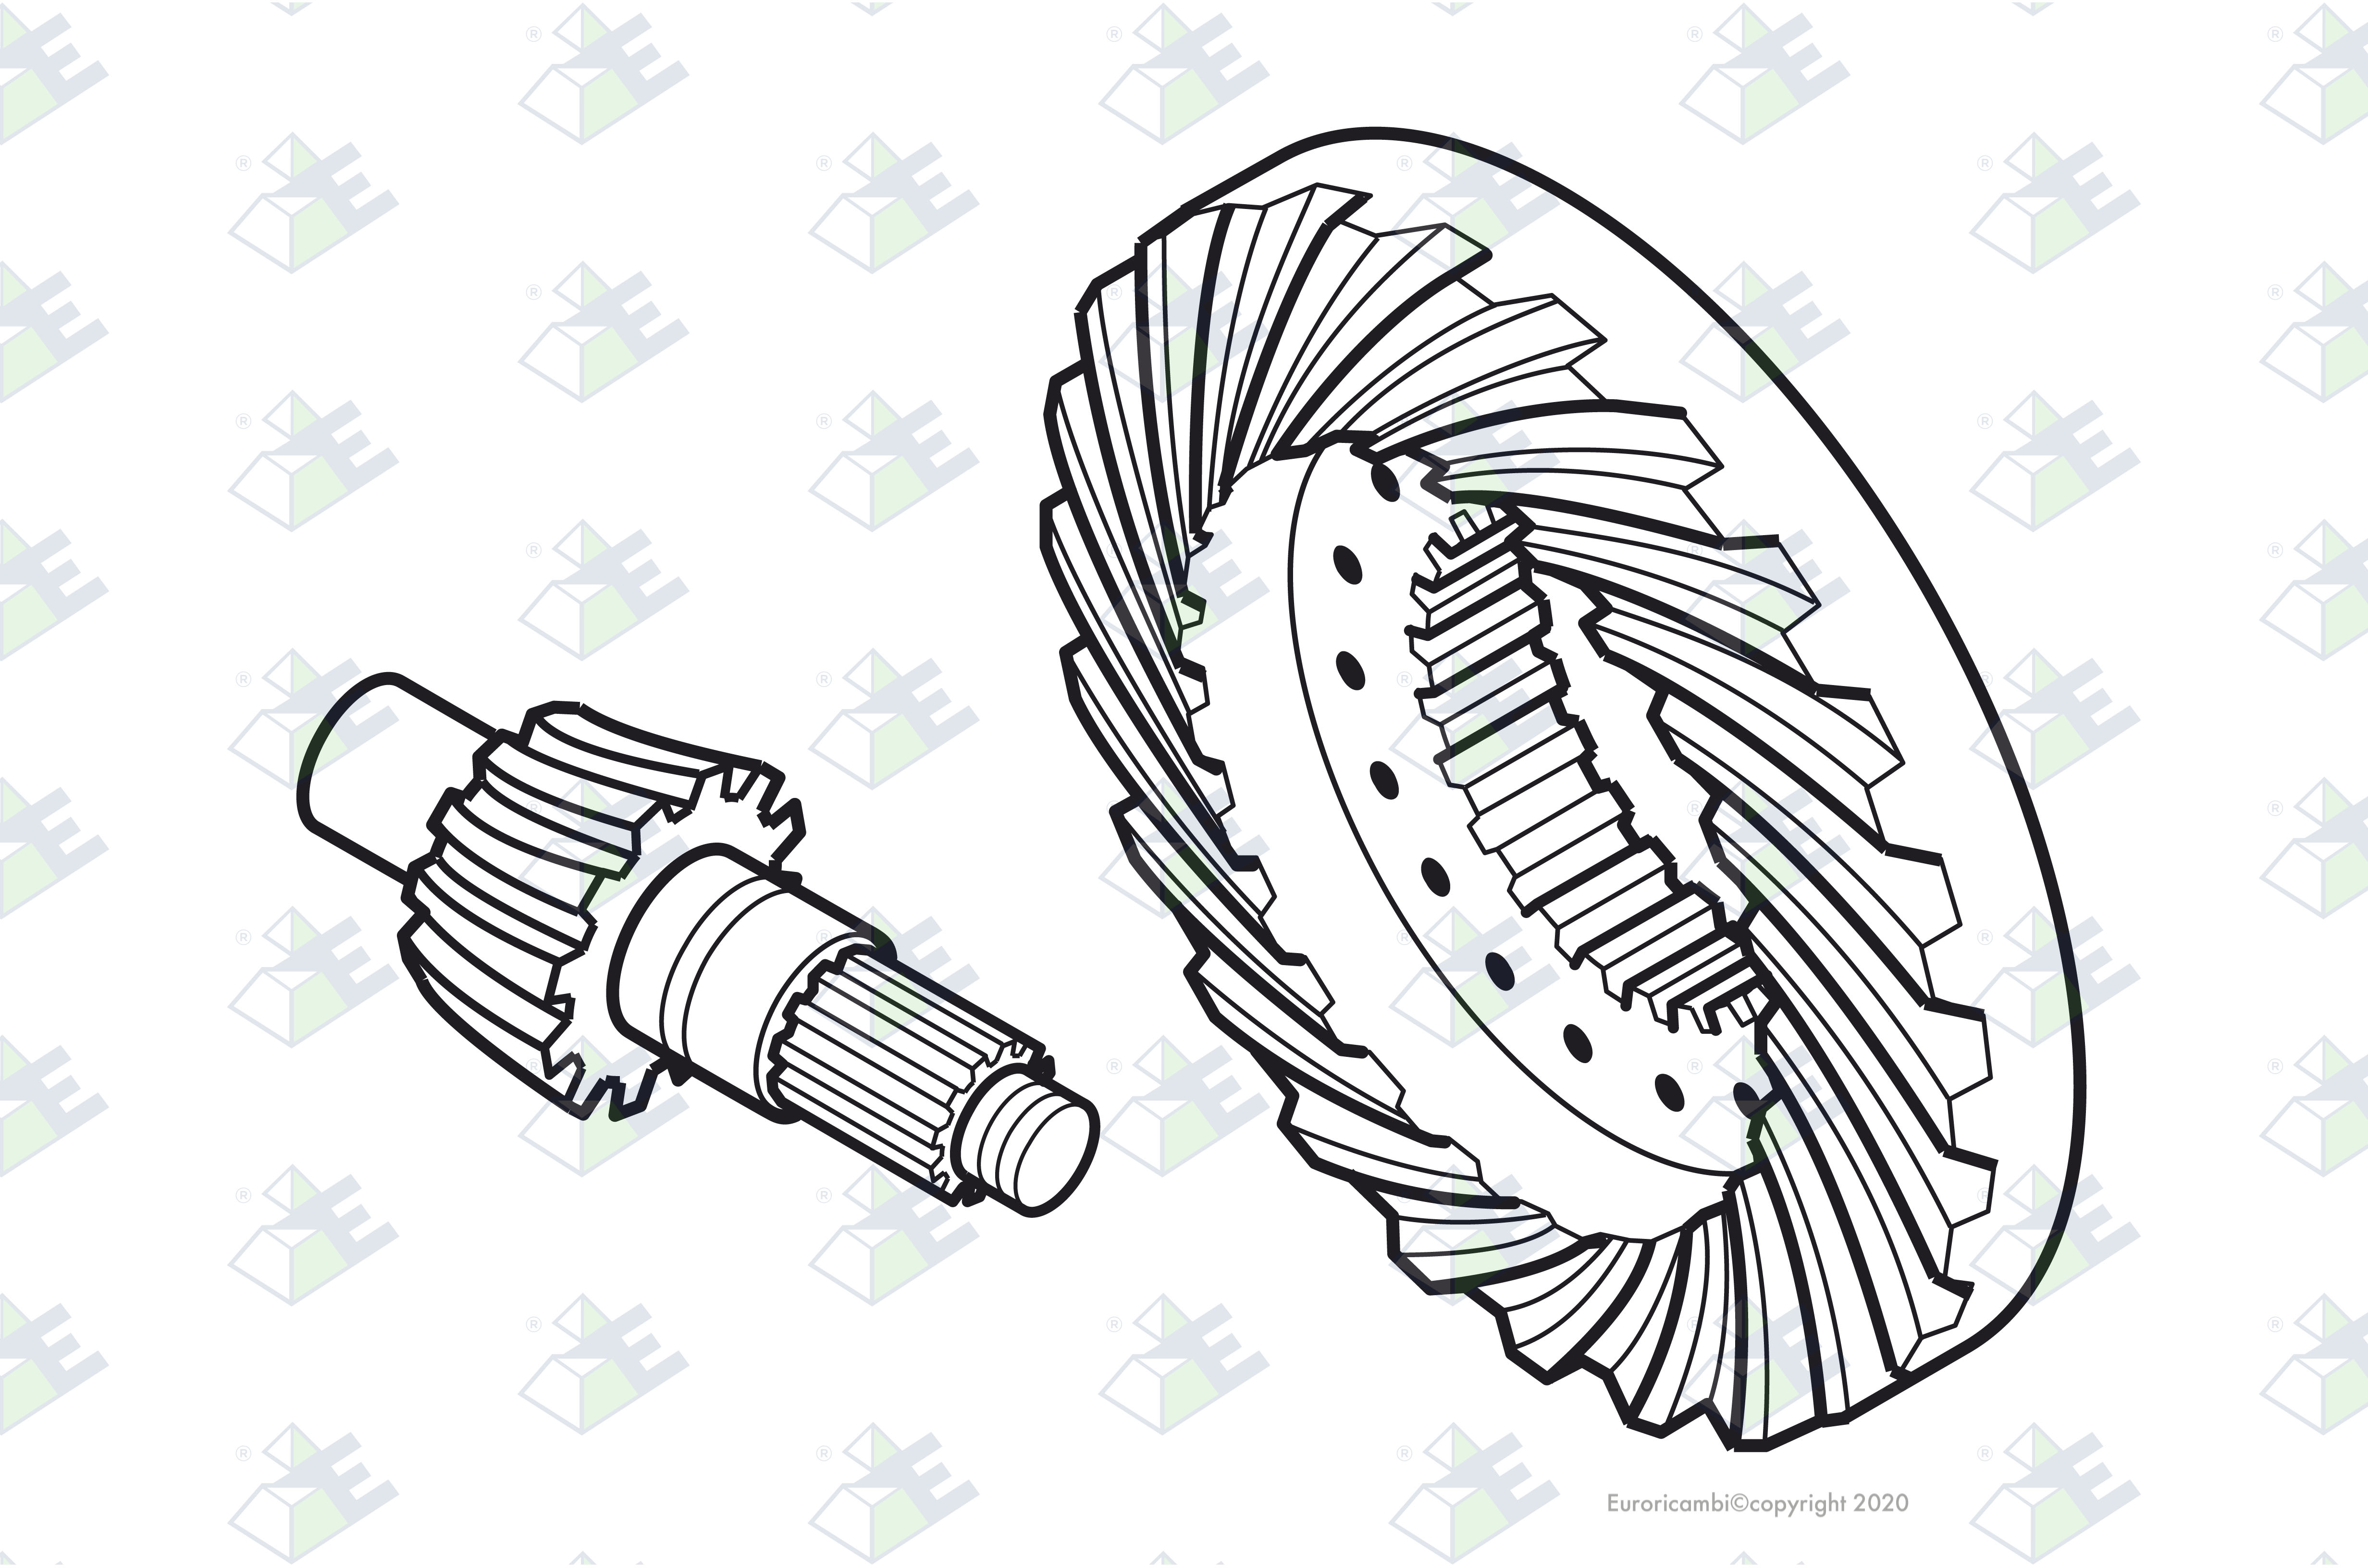 CROWN WHEEL/PINION 46:7 suitable to AM GEARS 66323